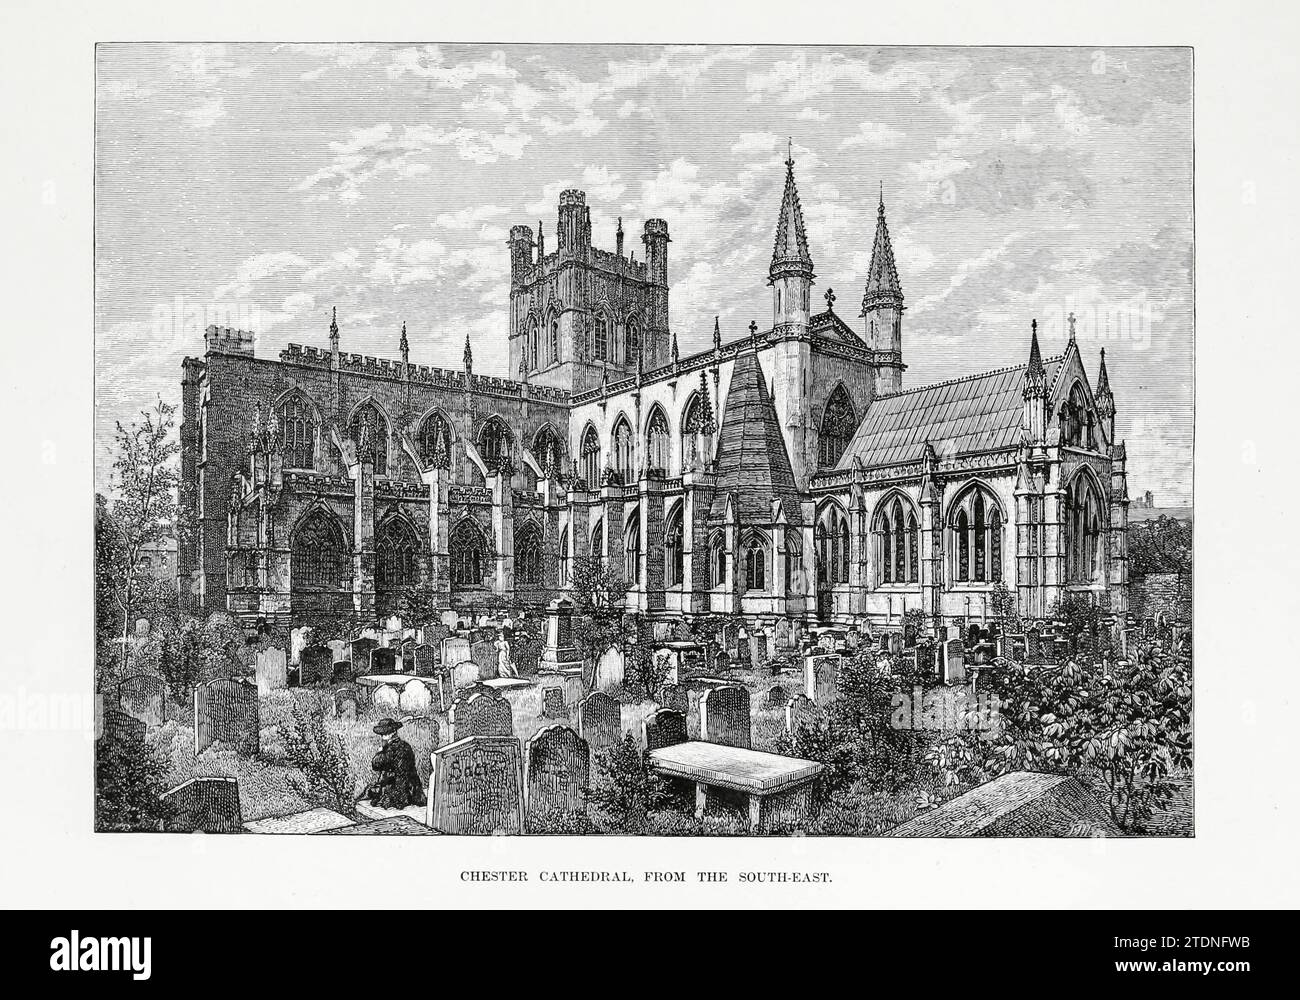 Chester Cathedral from the South East aus dem Buch Cathedrals, Abbeys and Church of England and Wales : Descriptive, Historical, Pictorial Band 1 von Bonney, T. G. (Thomas George), 1833–1923; Publisher London : Cassell 1890 Stockfoto